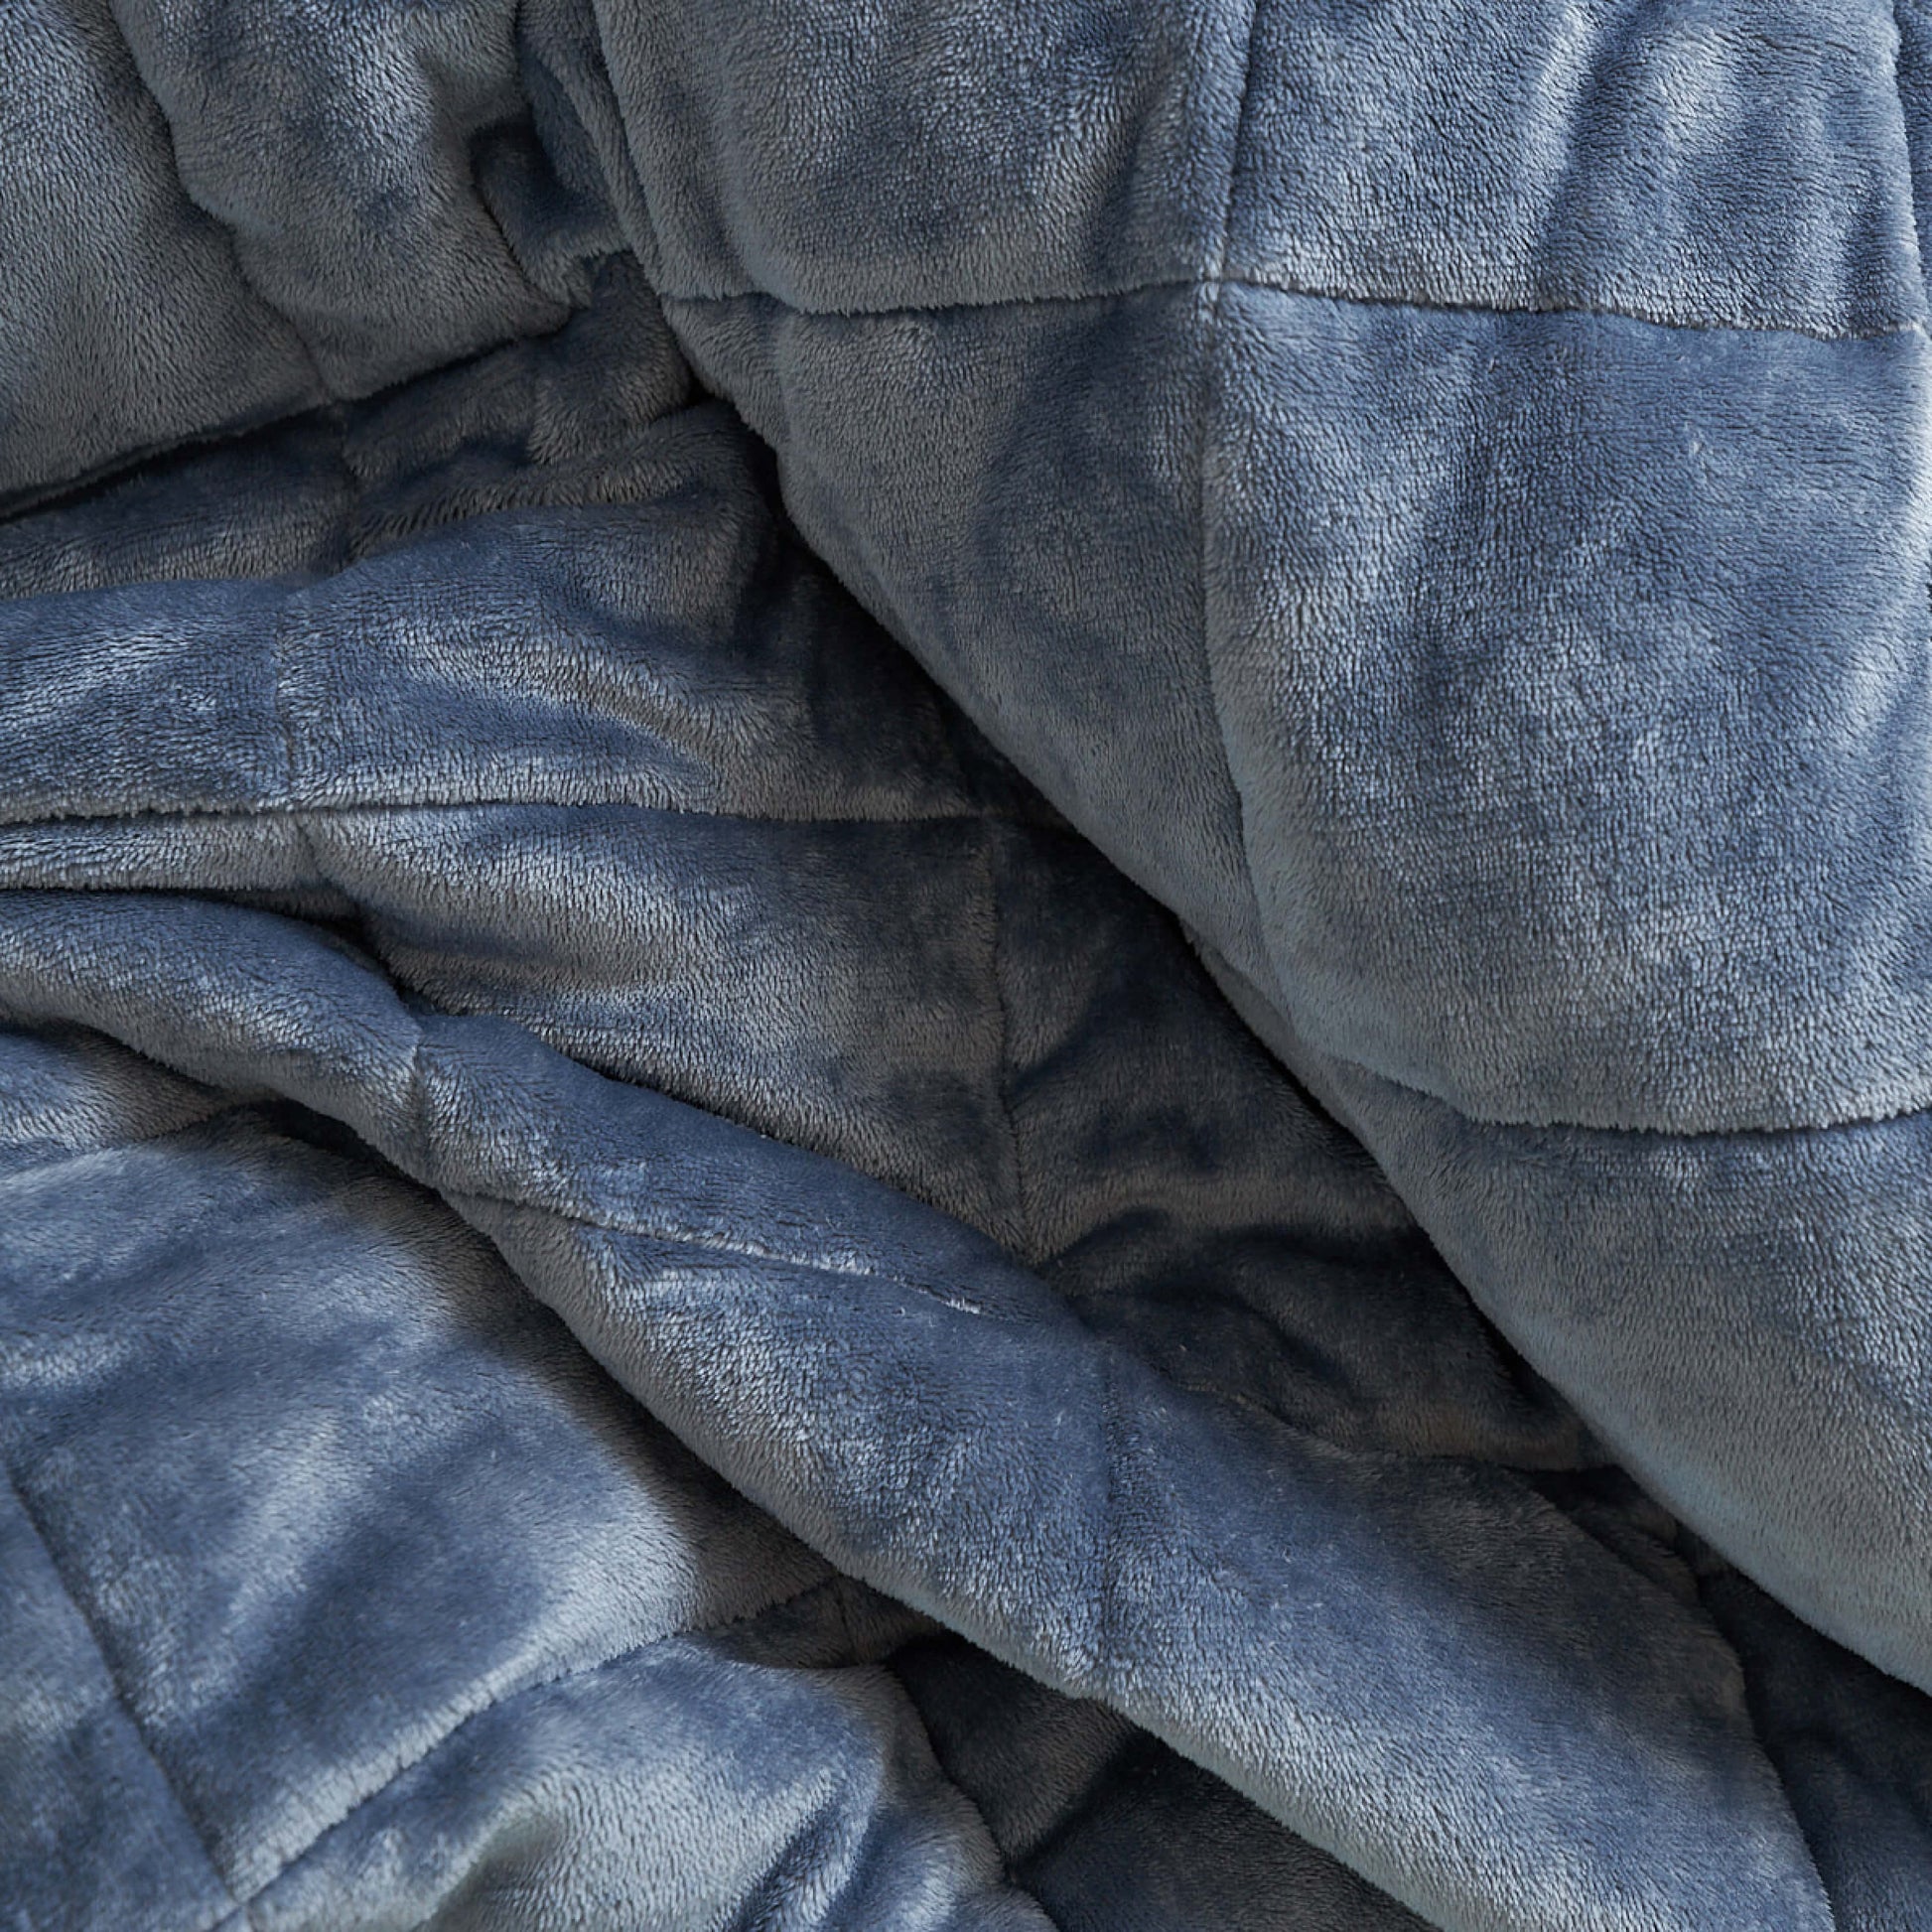 Detailed view of the Slumber Cloud Plush Throw Blanket made with Outlast Temperature regulation technology in bold blue